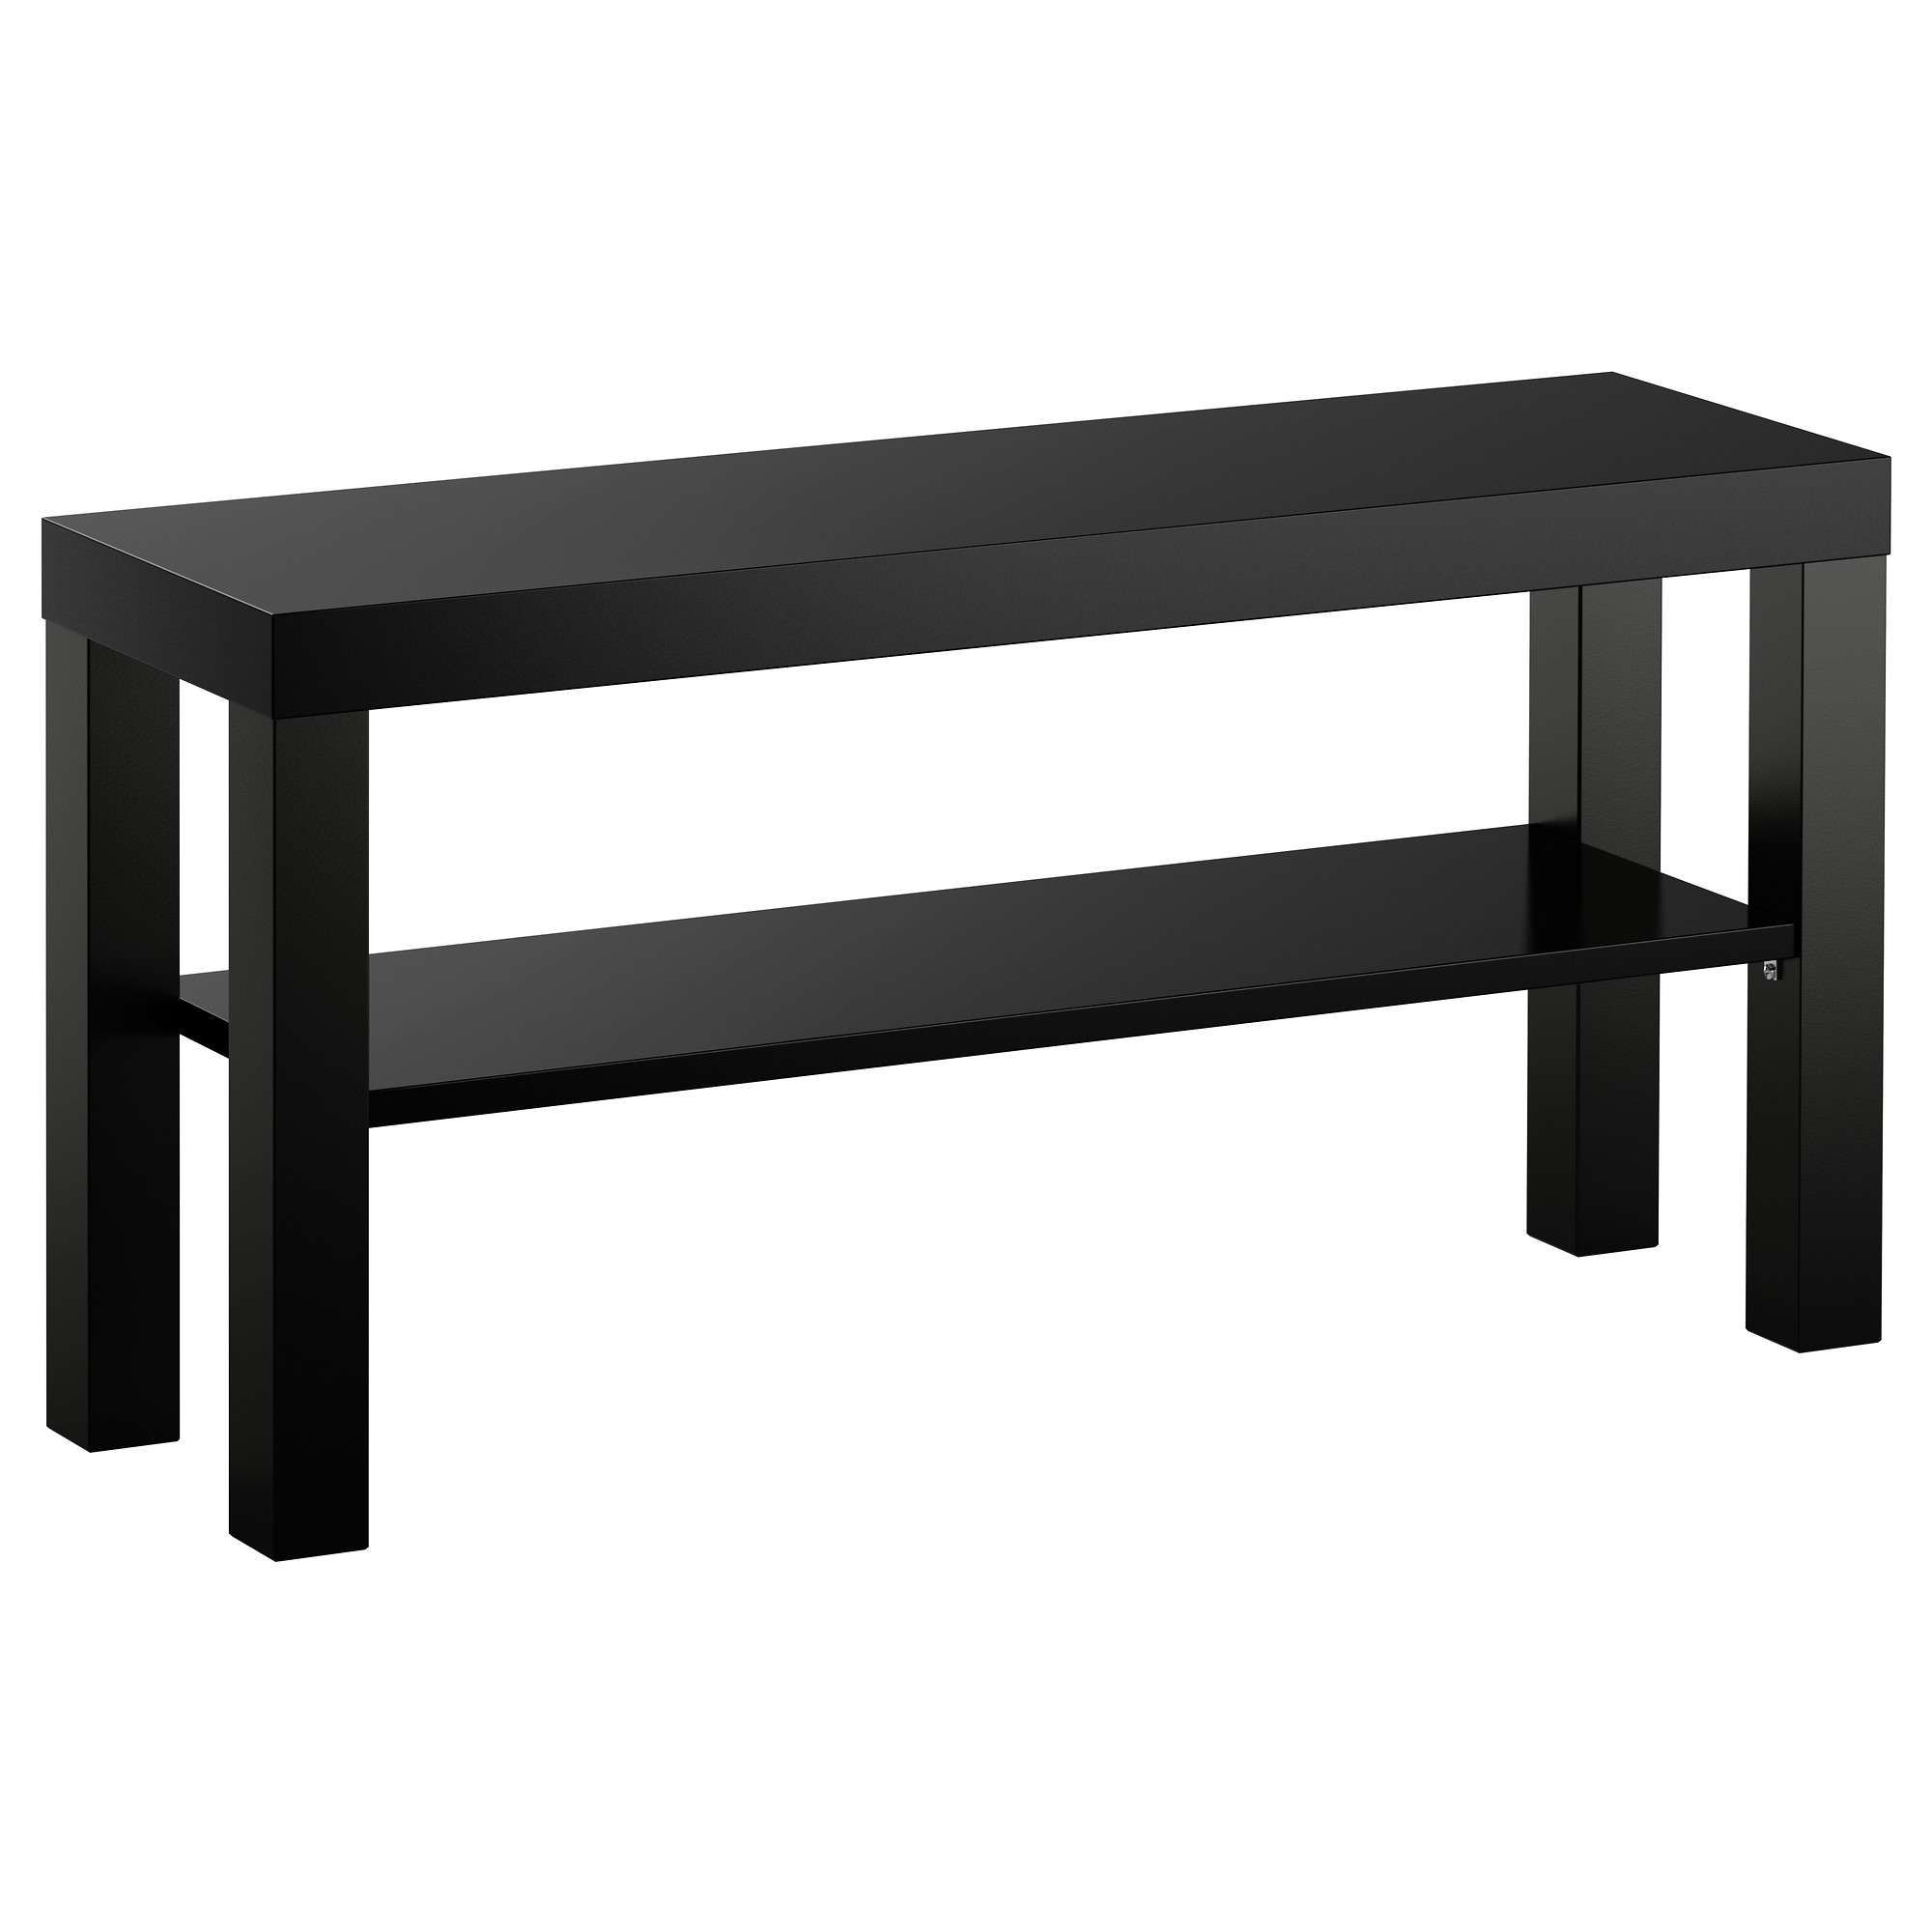 Lack Tv Bench Black 90x26 Cm – Ikea Inside Bench Tv Stands (Gallery 12 of 15)